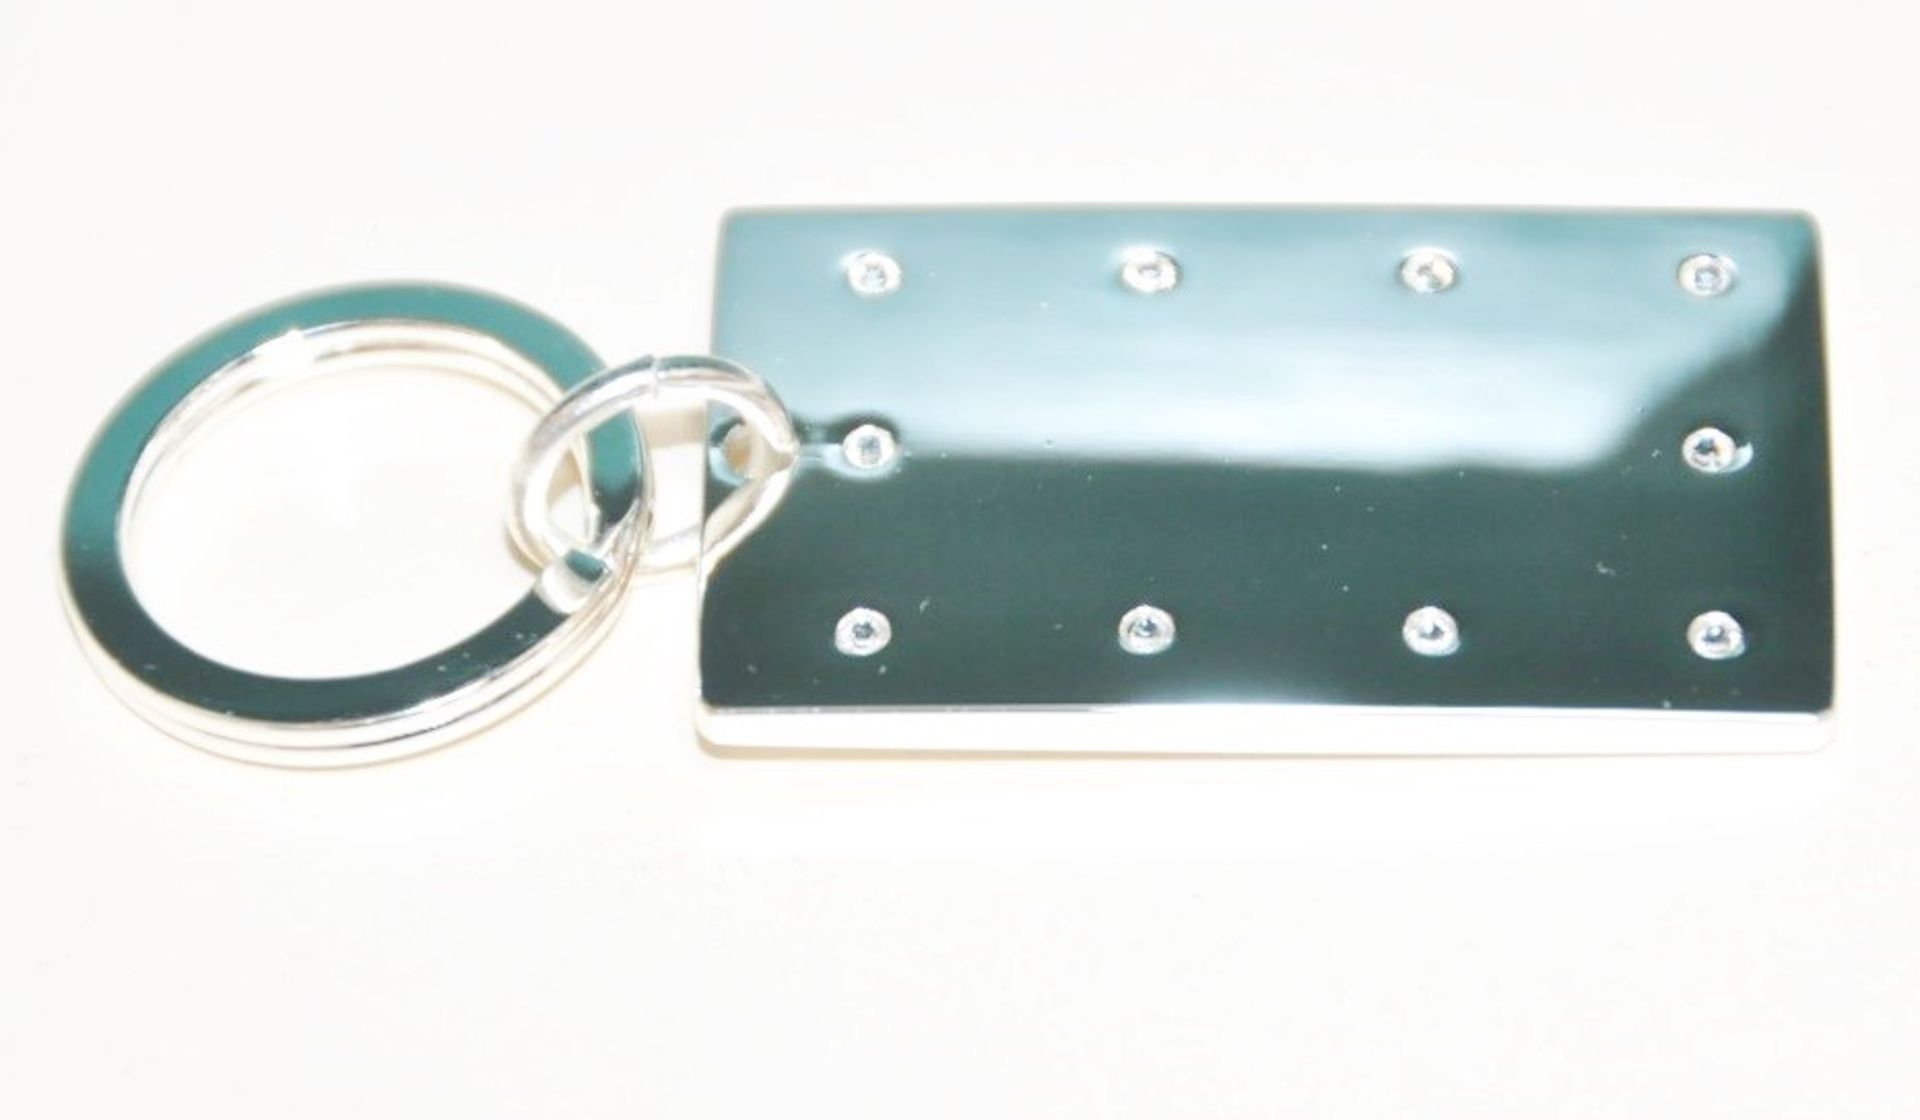 50 x Silver Plated Rectangular Key Rings By ICE London - MADE WITH "SWAROVSKI¨ ELEMENTS - Luxury - Image 2 of 6